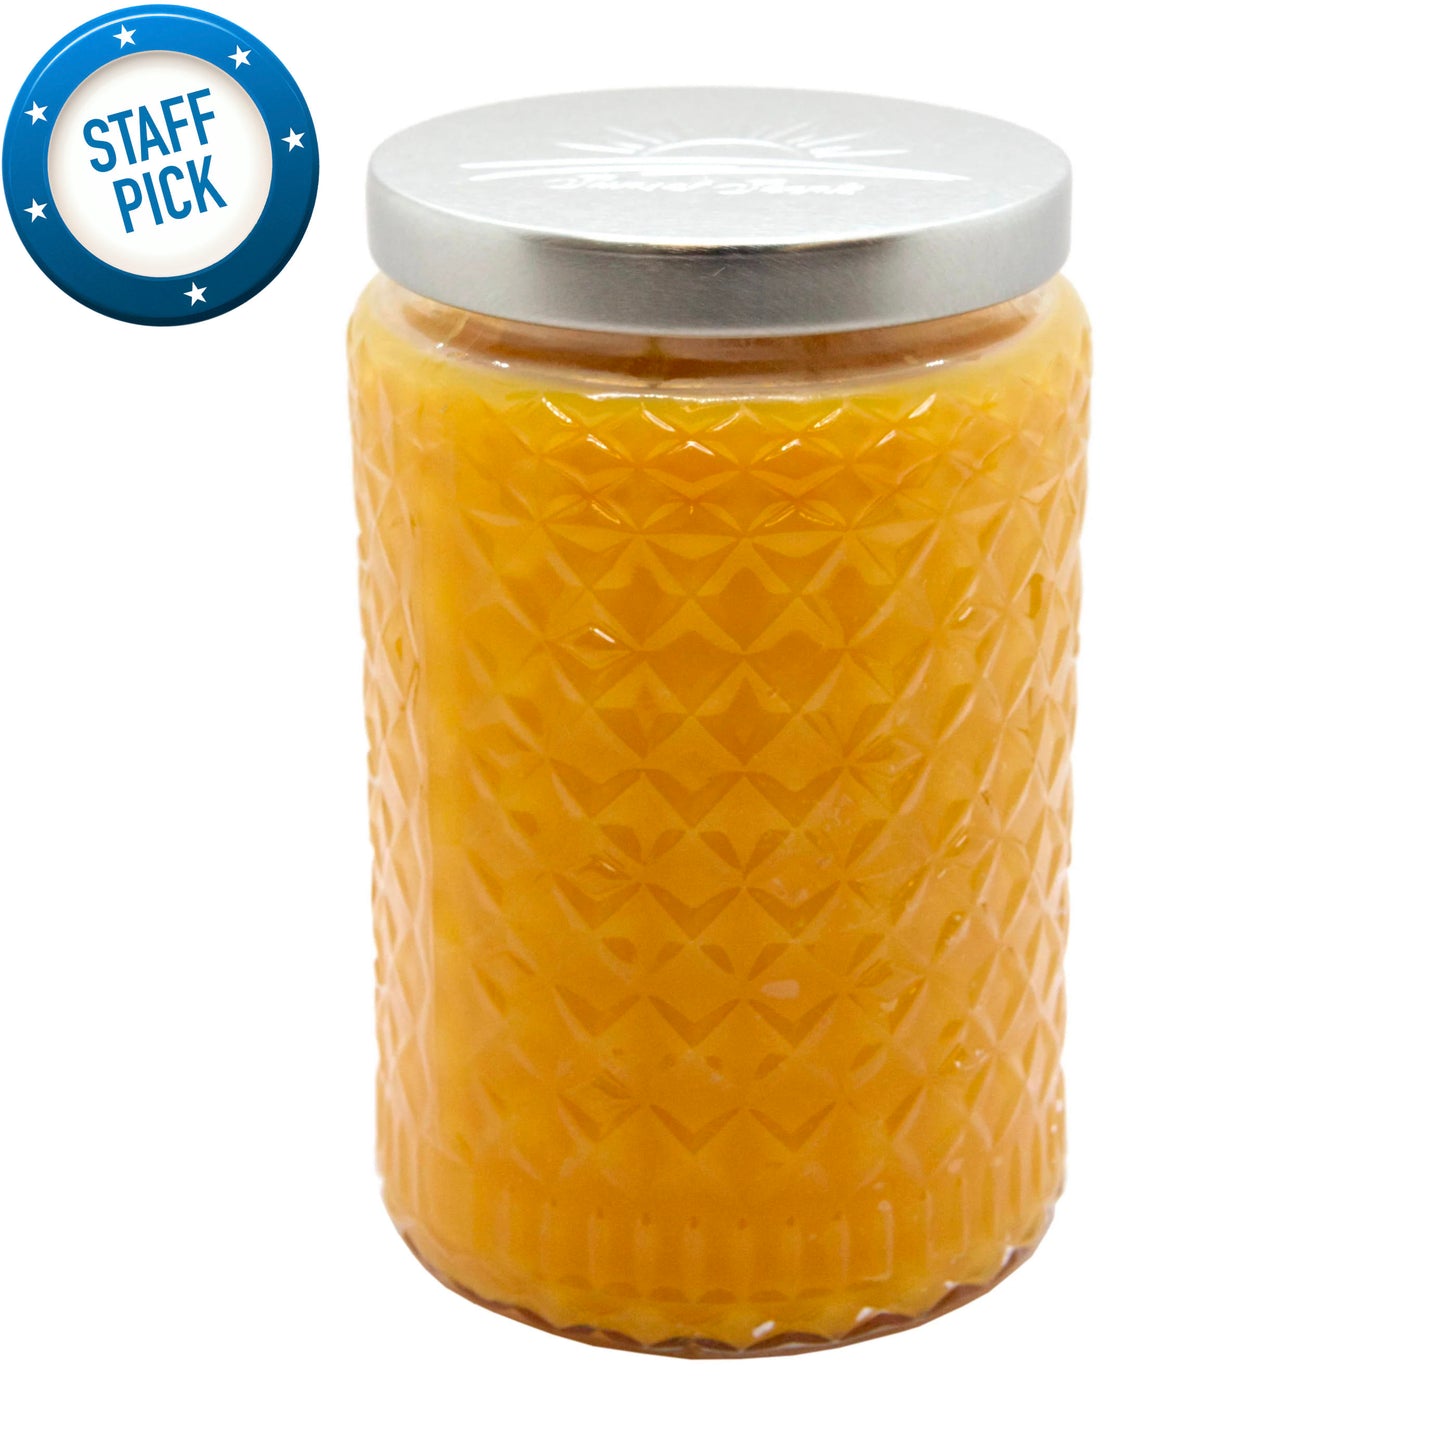 Orange Blossoms Scented Candle 24oz